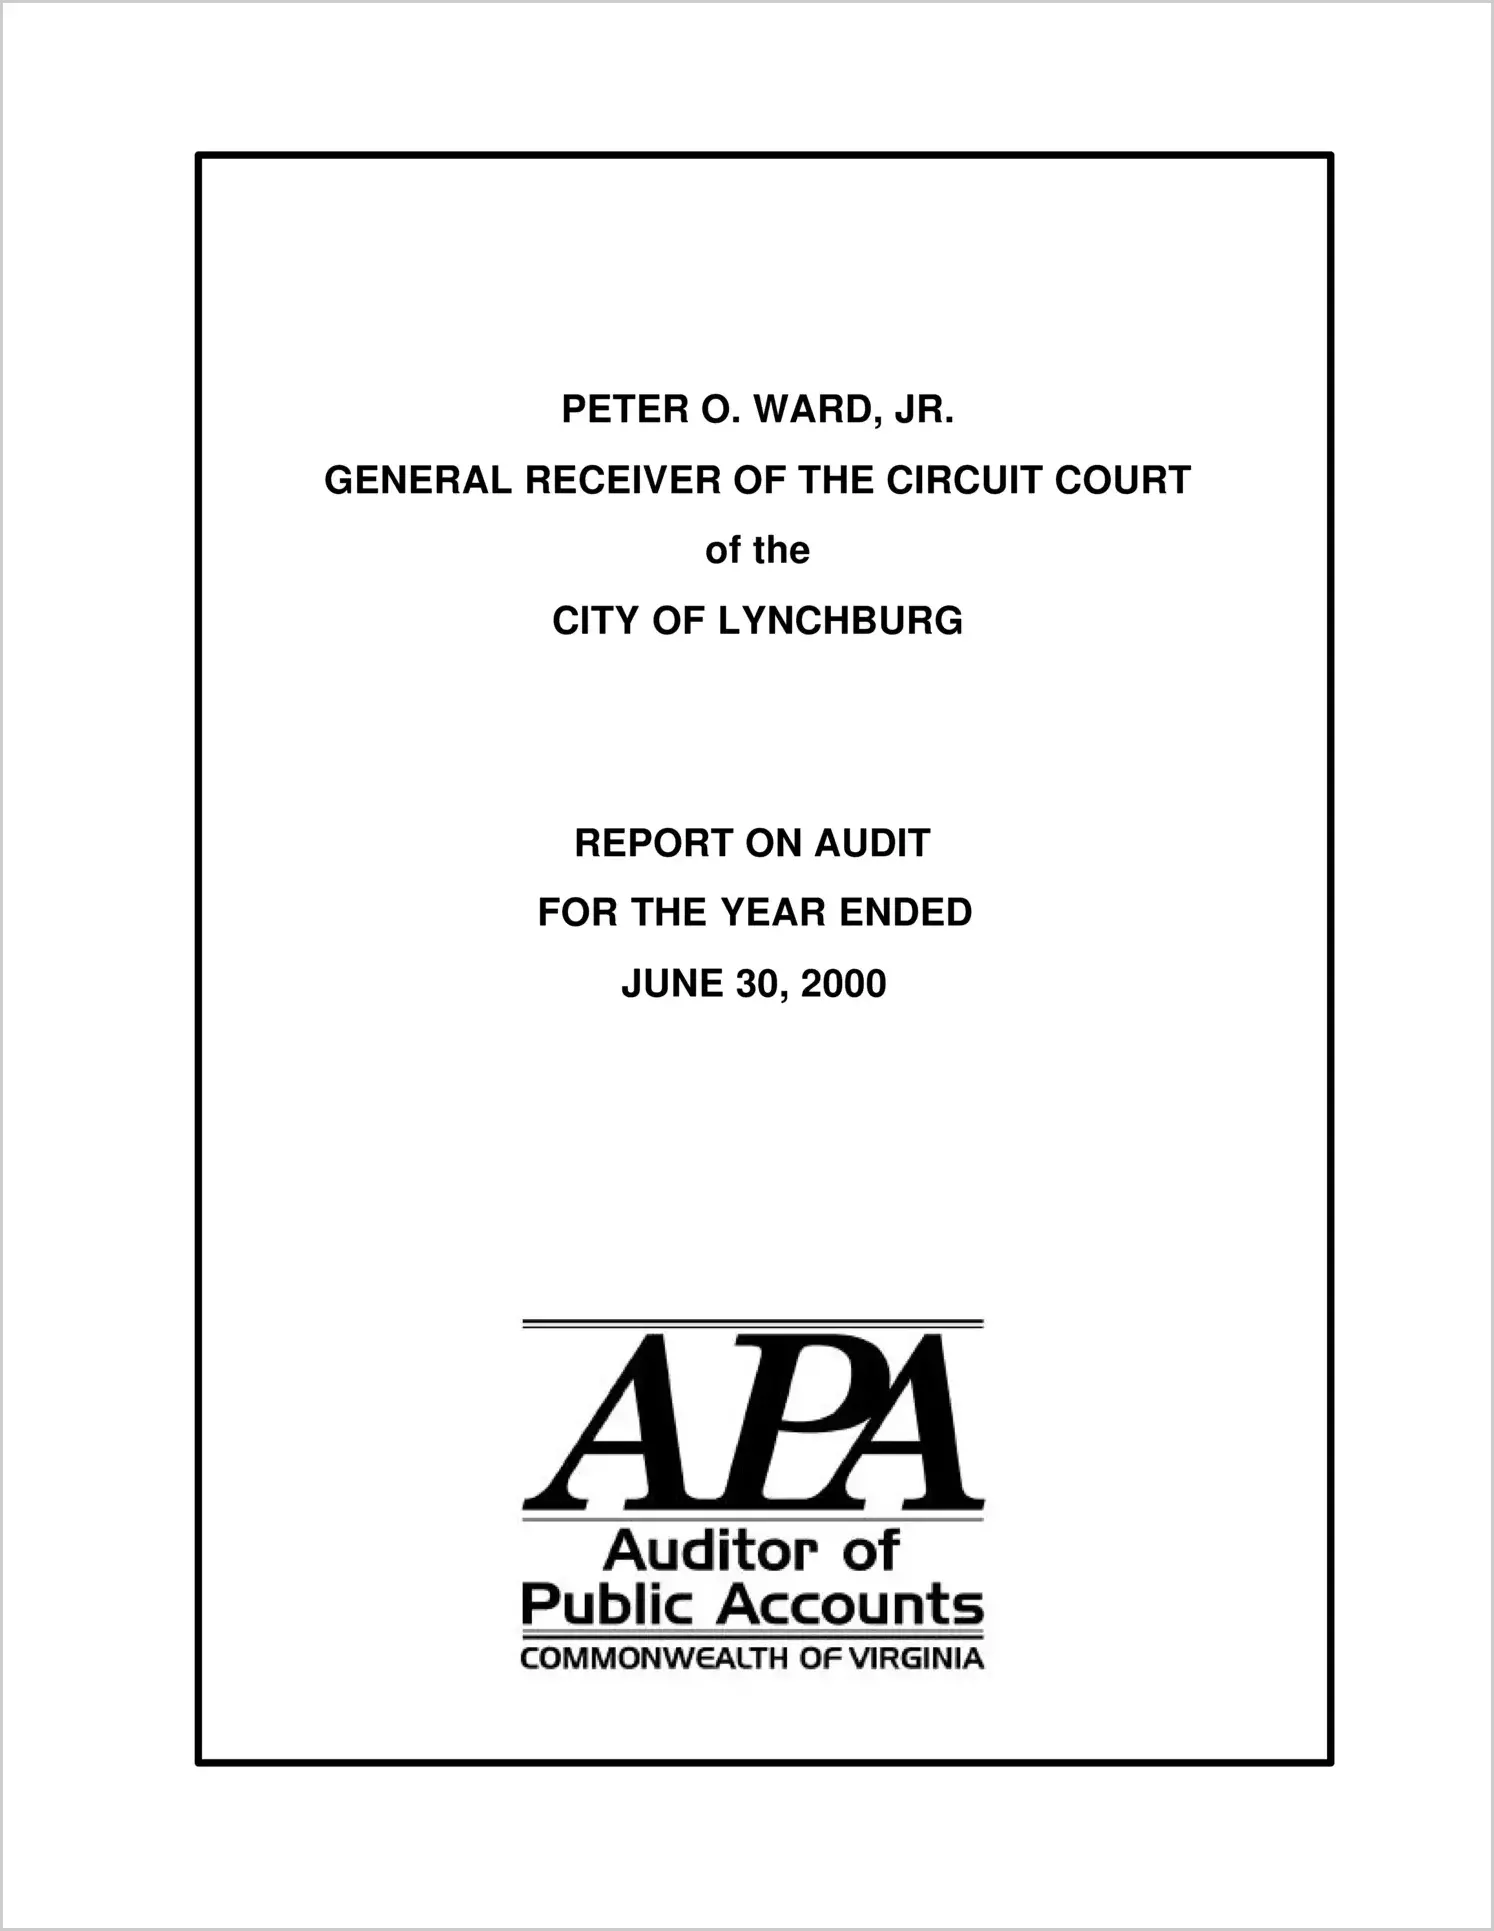 General Receiver of the Circuit Court for the City of Lynchburg for the year ended June 30, 2000